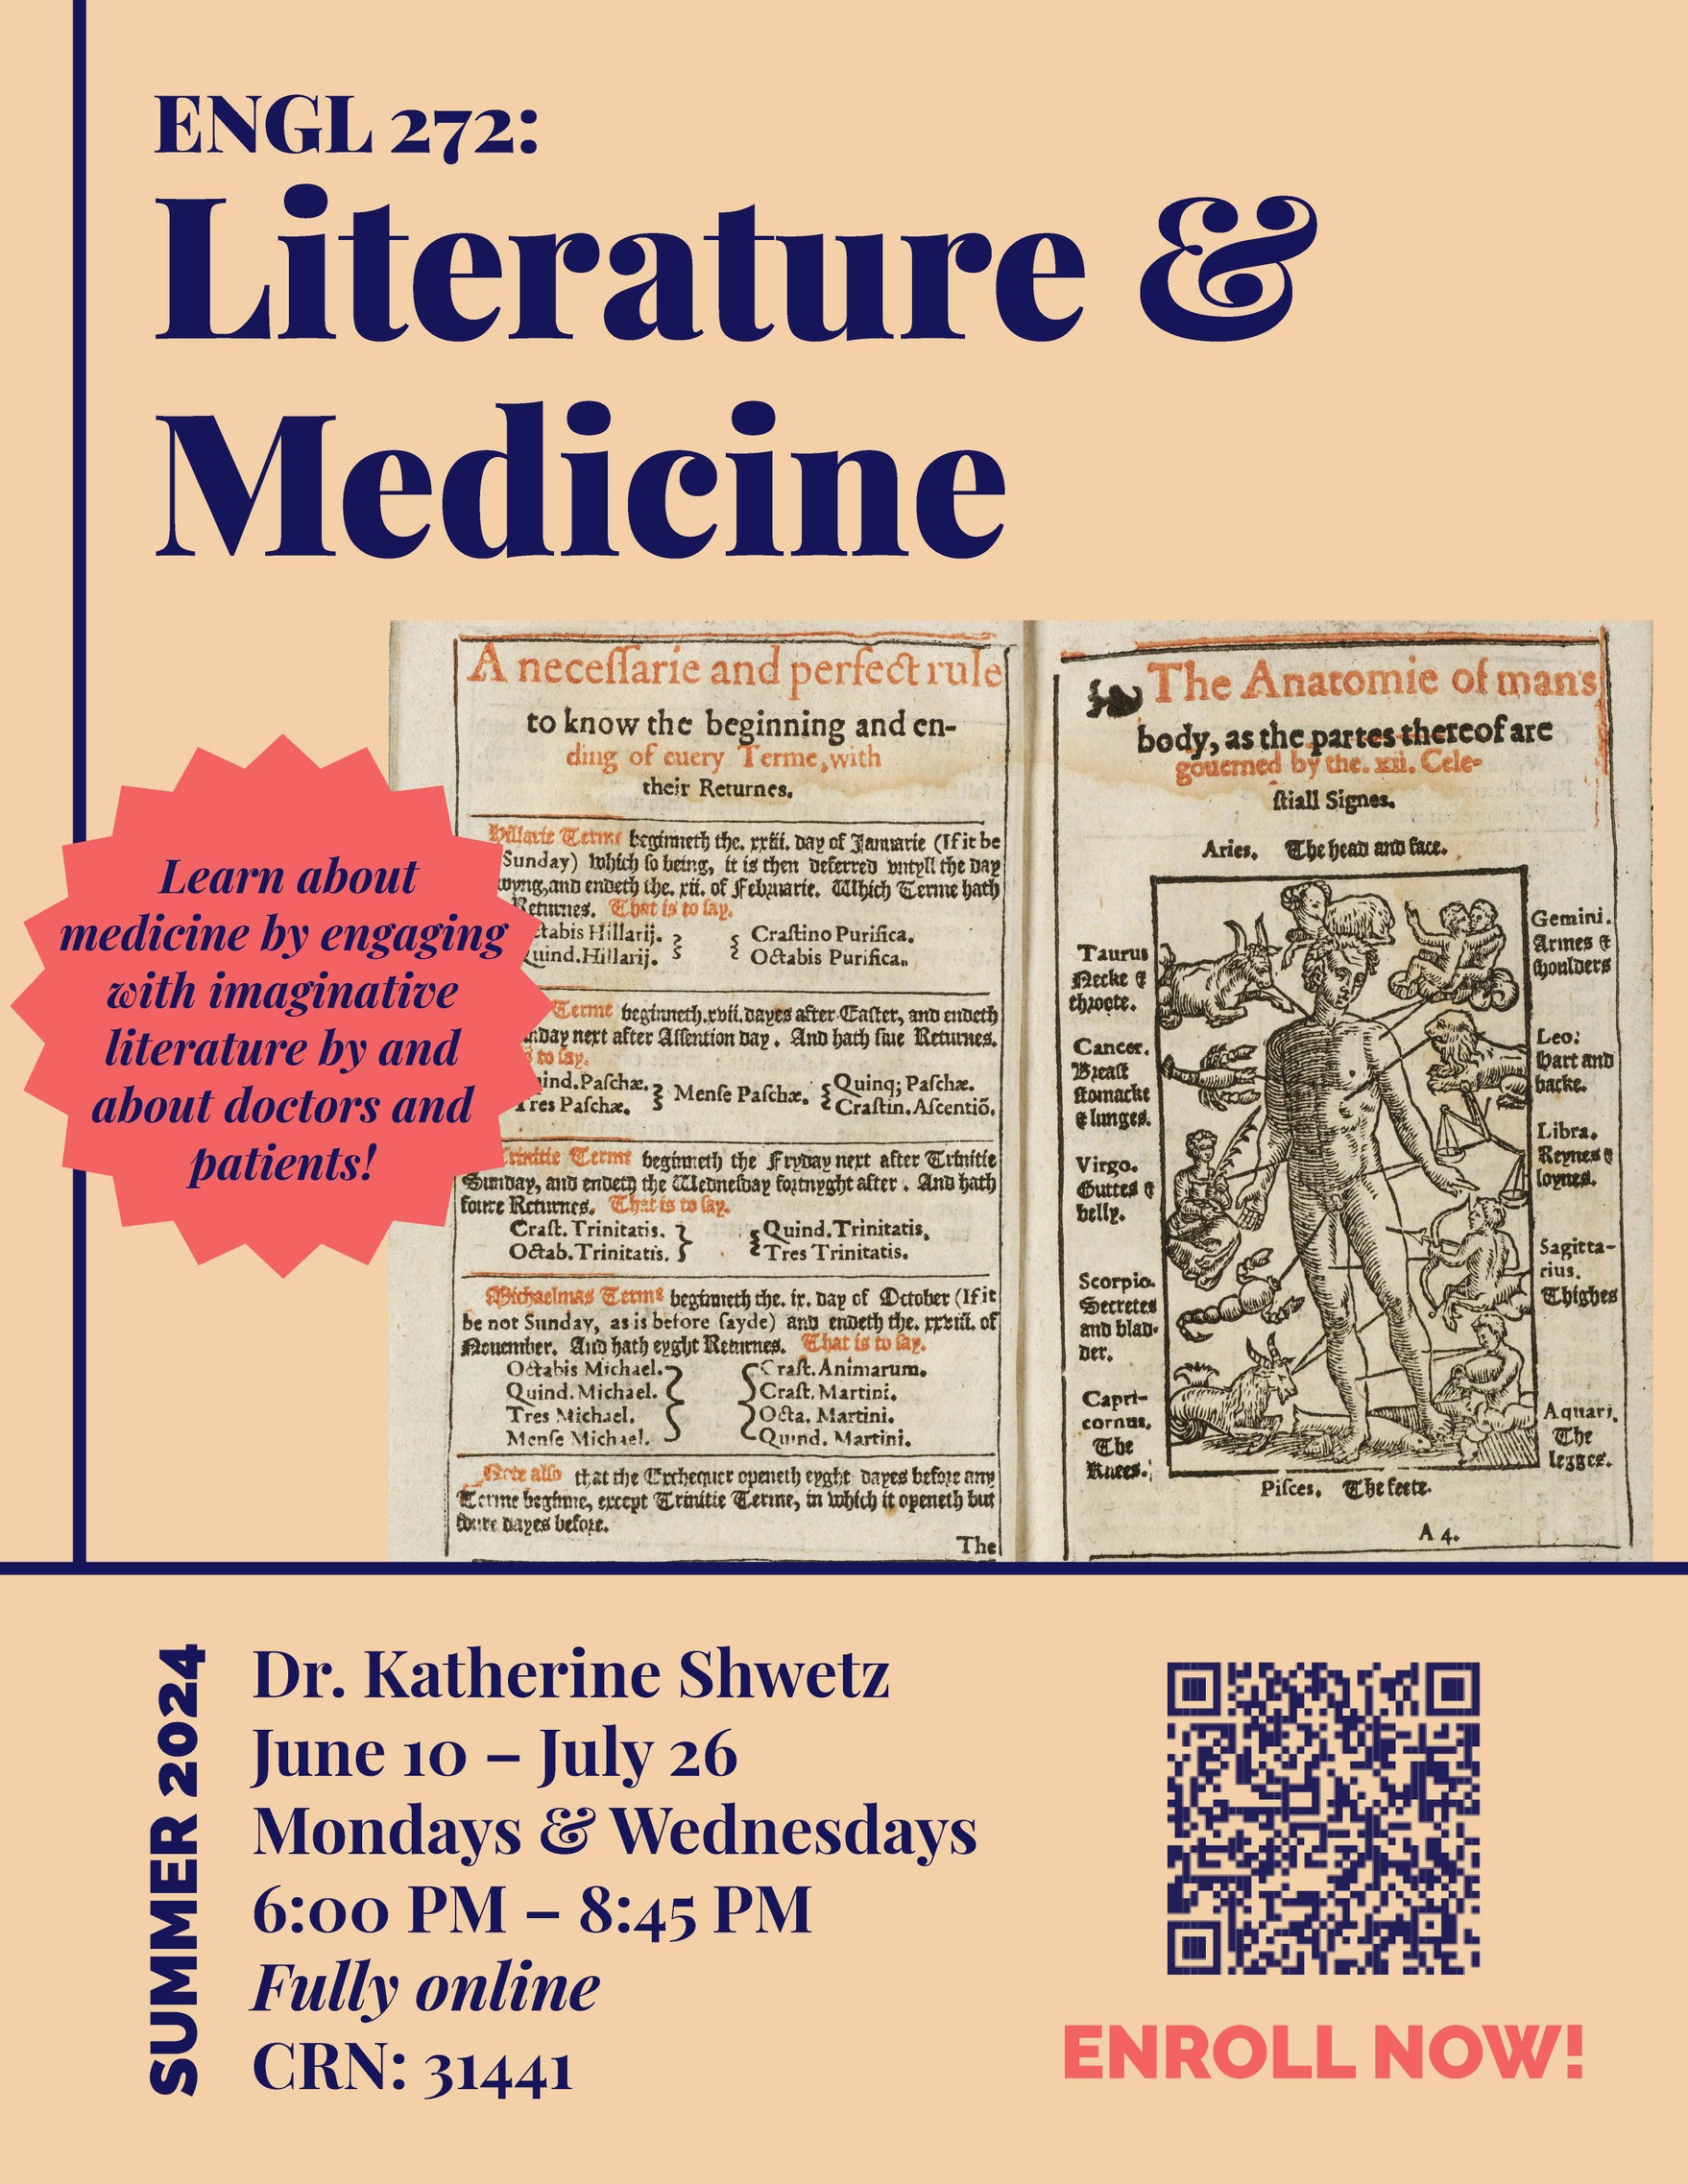 Summer course, English 272, Literature and Medicine, with Instructor Katherine Shwetz